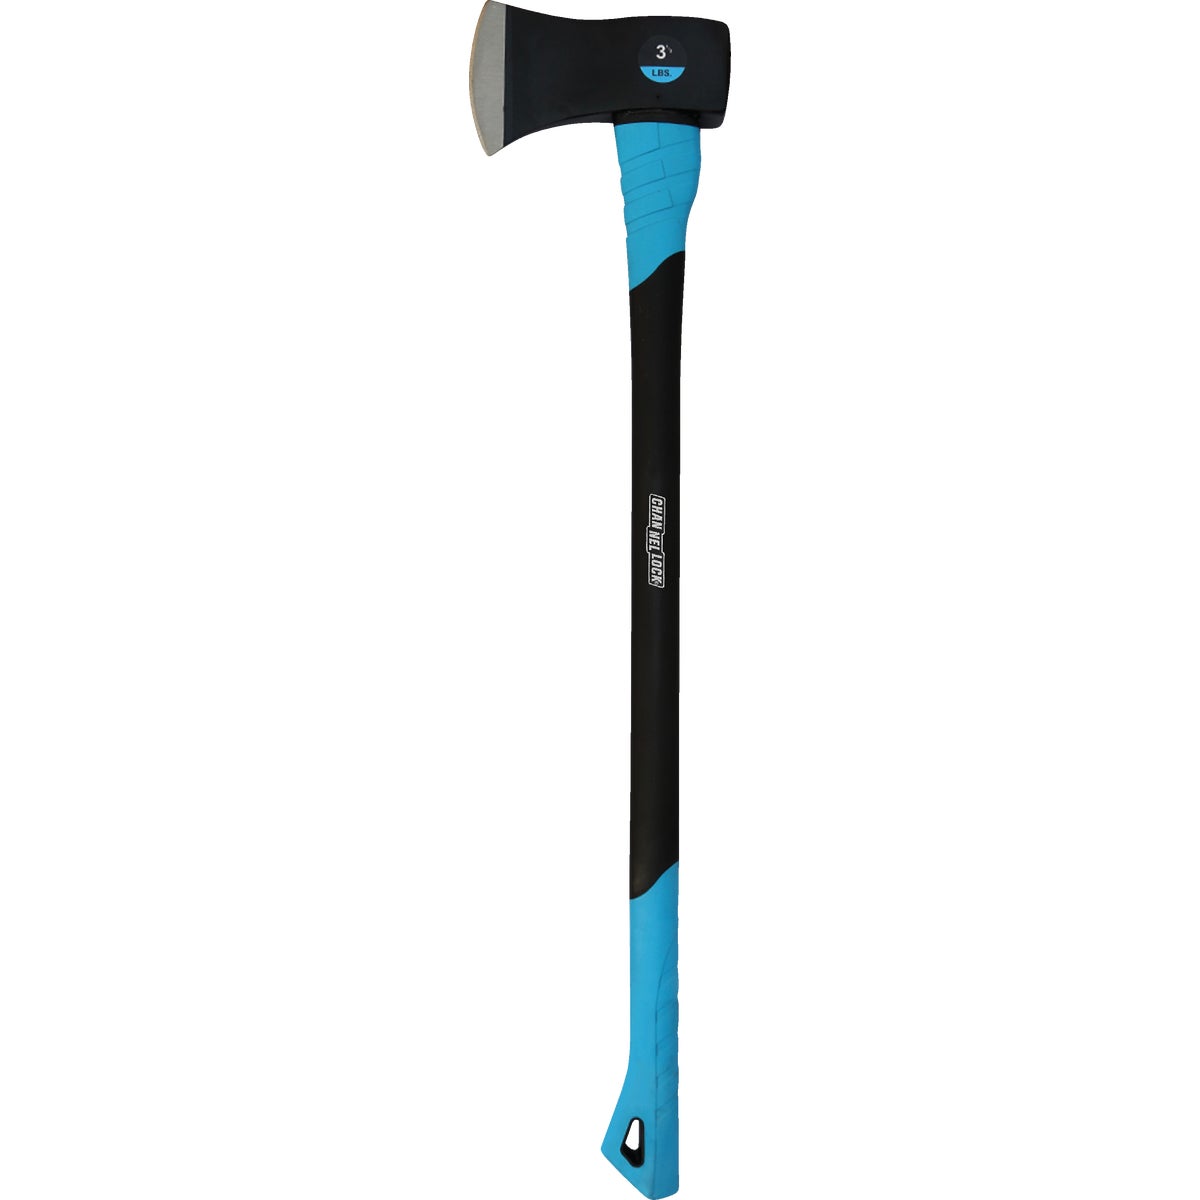 Item 361021, Channellock single bit axe is constructed of a high-carbon steel forged 